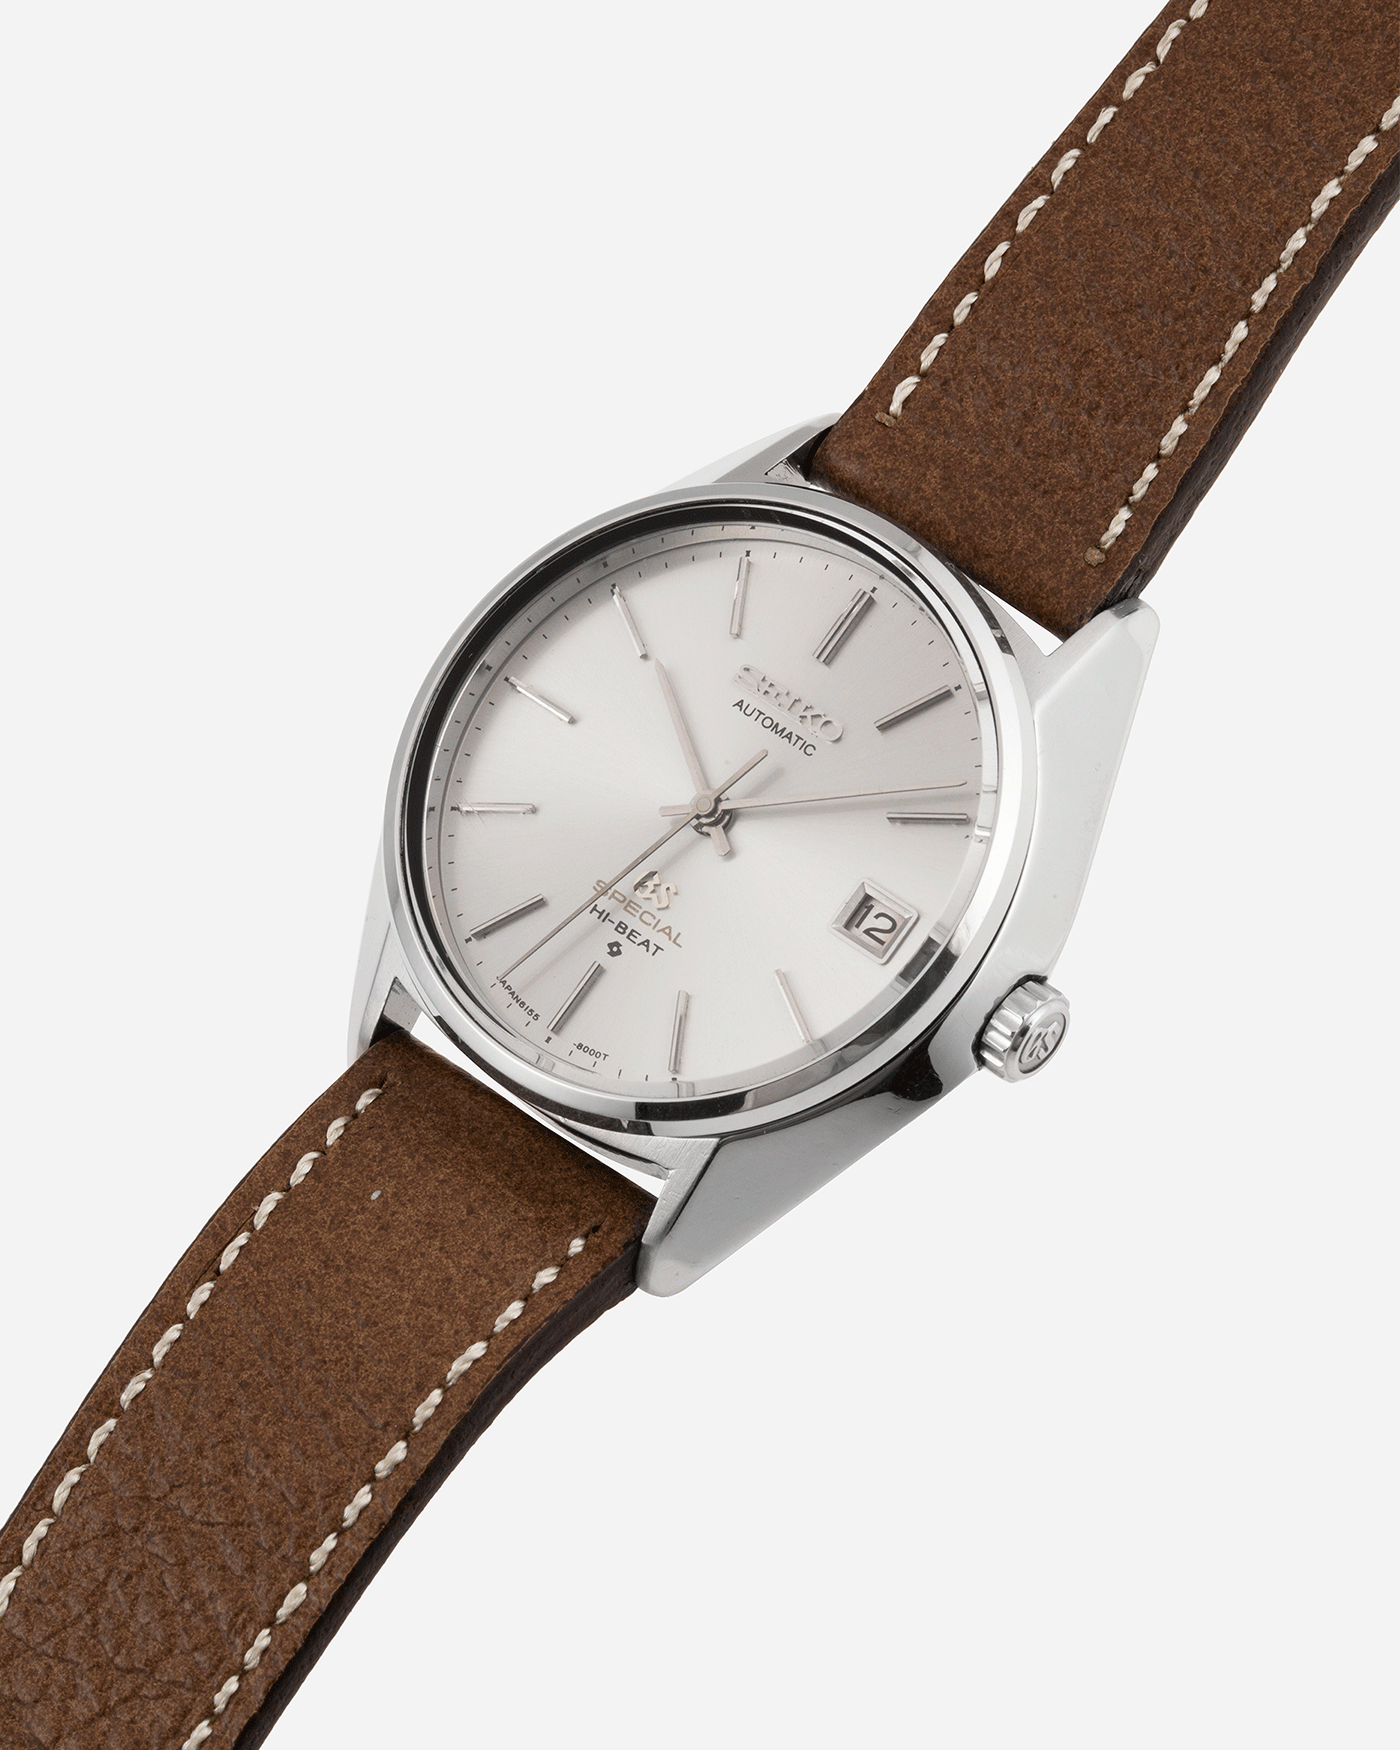 Brand: Grand Seiko Year: Circa 1970’s Reference Number: 6155-8000 Material: Stainless Steel Movement: Cal 6155 Case Diameter: 36.5mm Lug Width: 18mm Bracelet/Strap: Unbranded Chestnut Brown Textured Leather